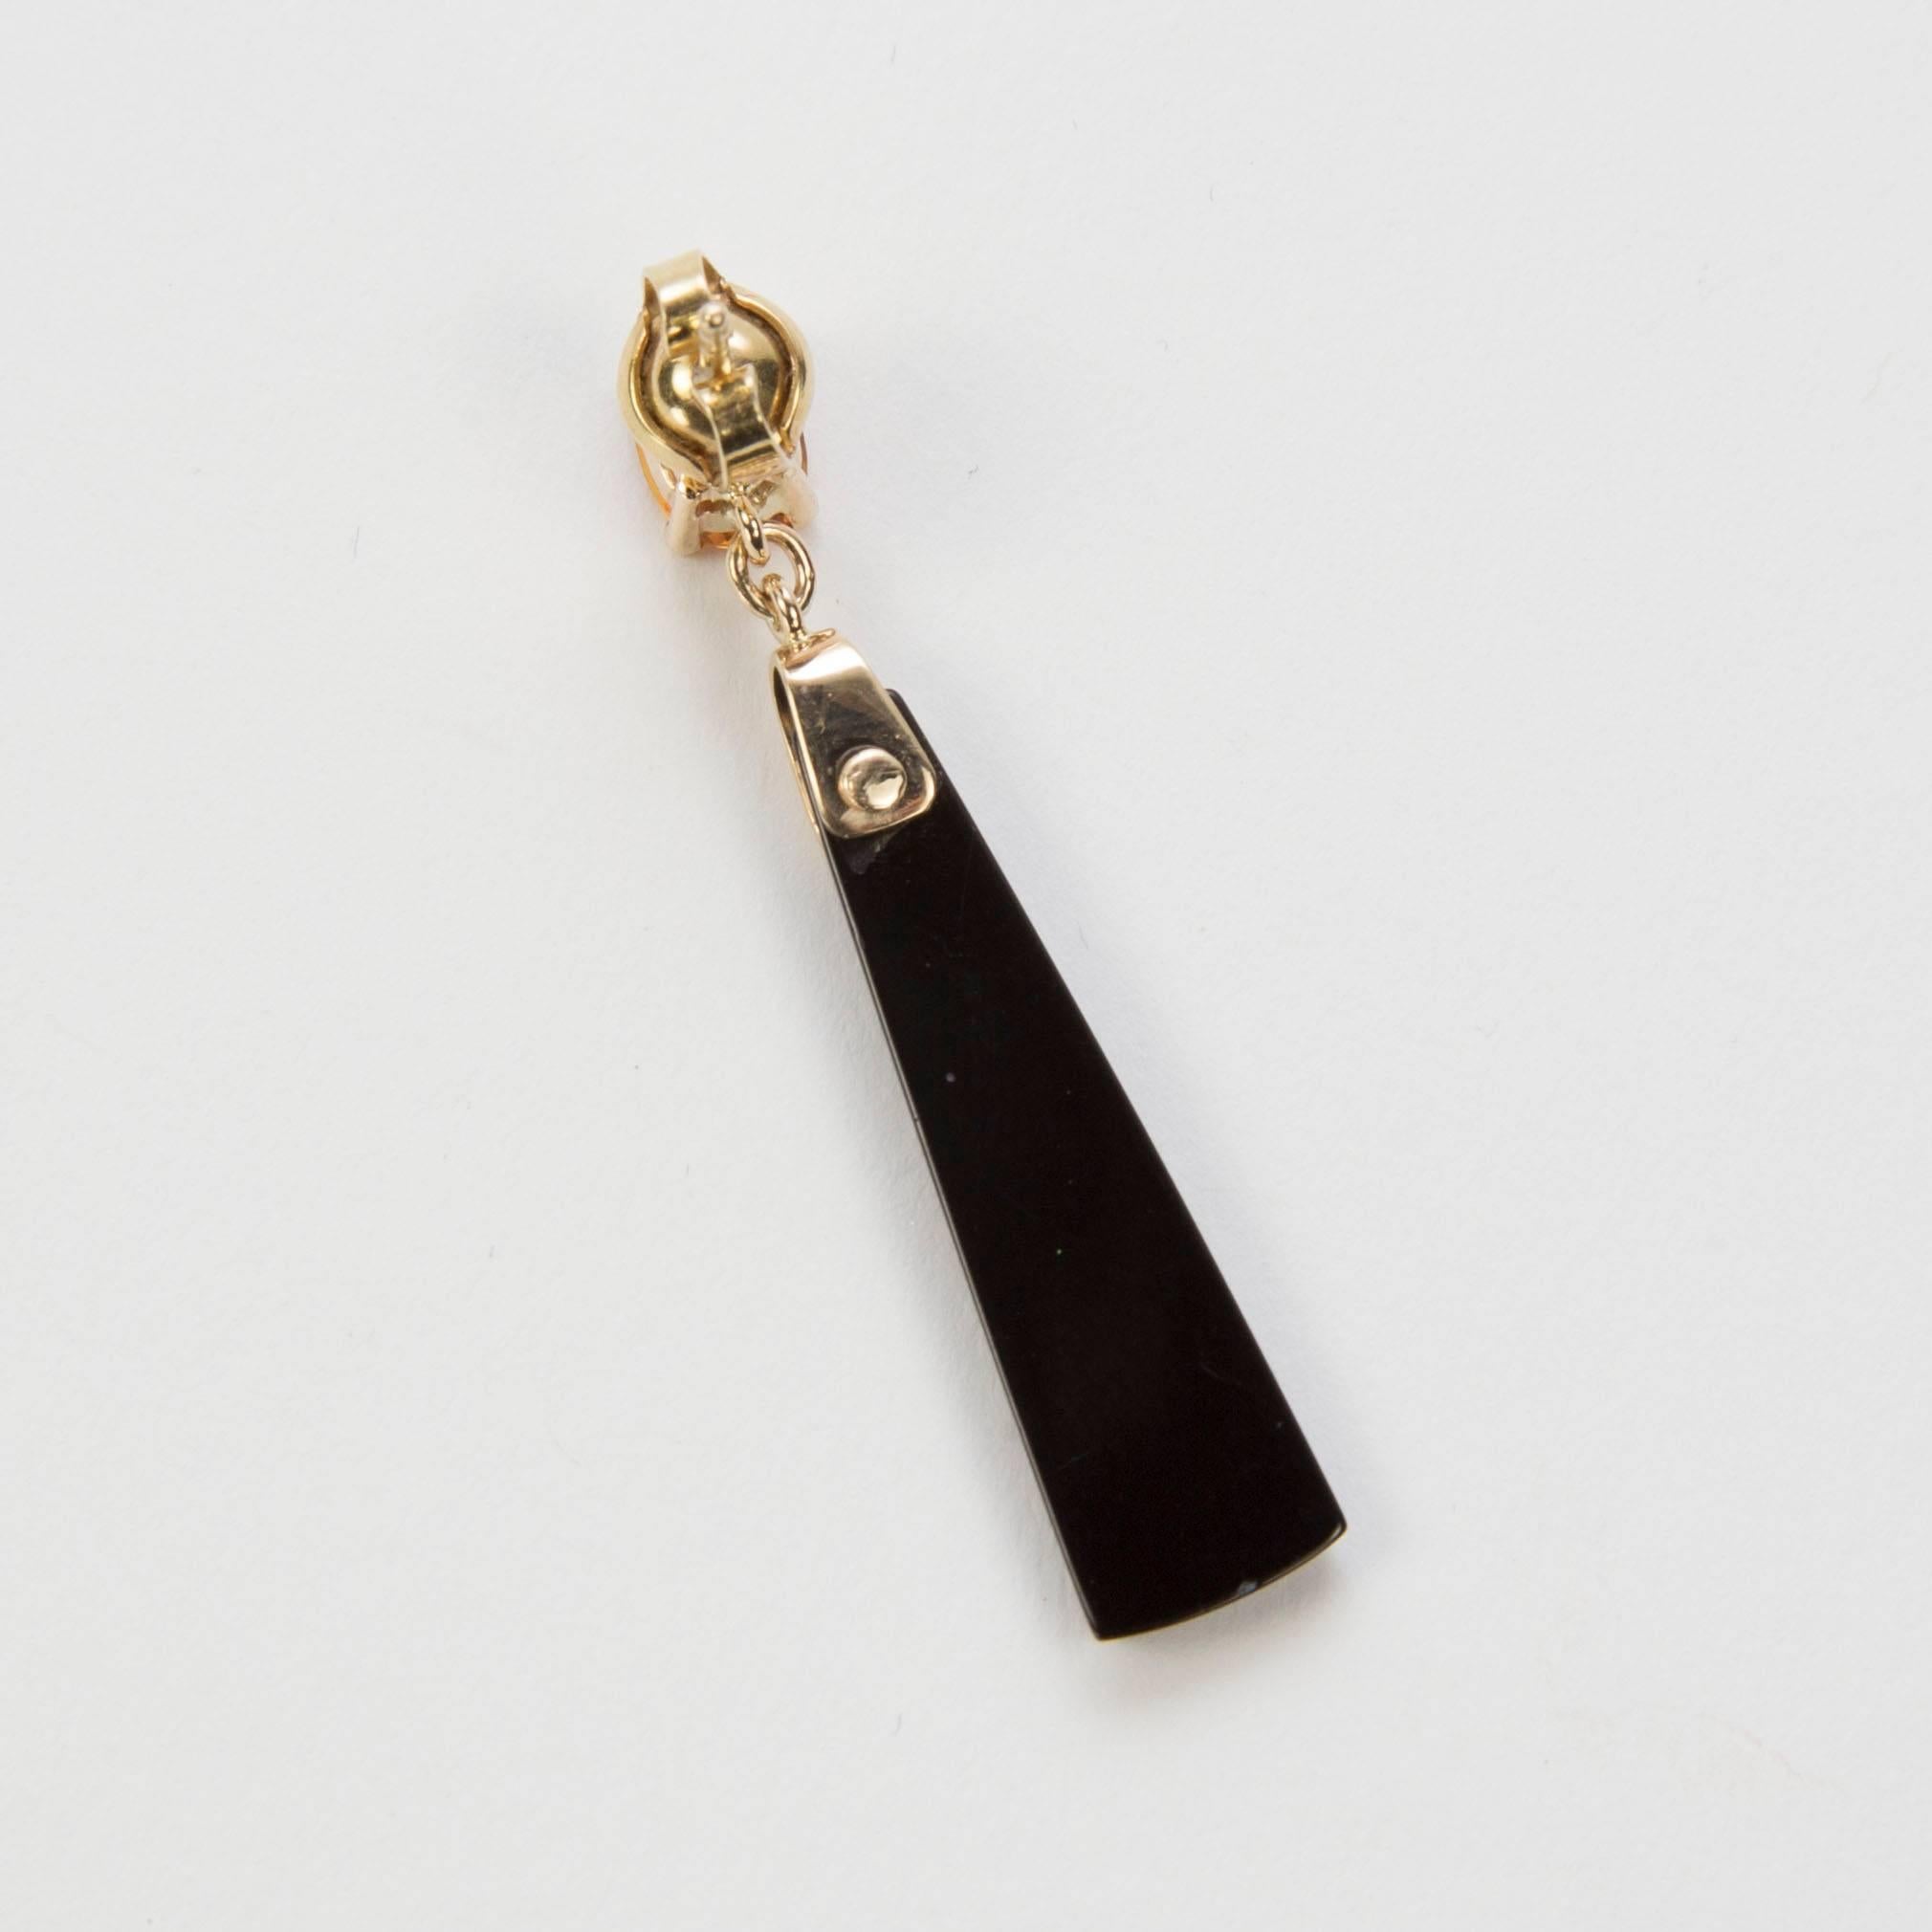 Striking Citrine and Gold-capped bar Onyx drop earrings exude sculptural simplicity and sophistication; hand crafted in 14K yellow gold; approx. 1.75 inches long. A perfect complement to every wardrobe and occasion… Illuminating your Look with a